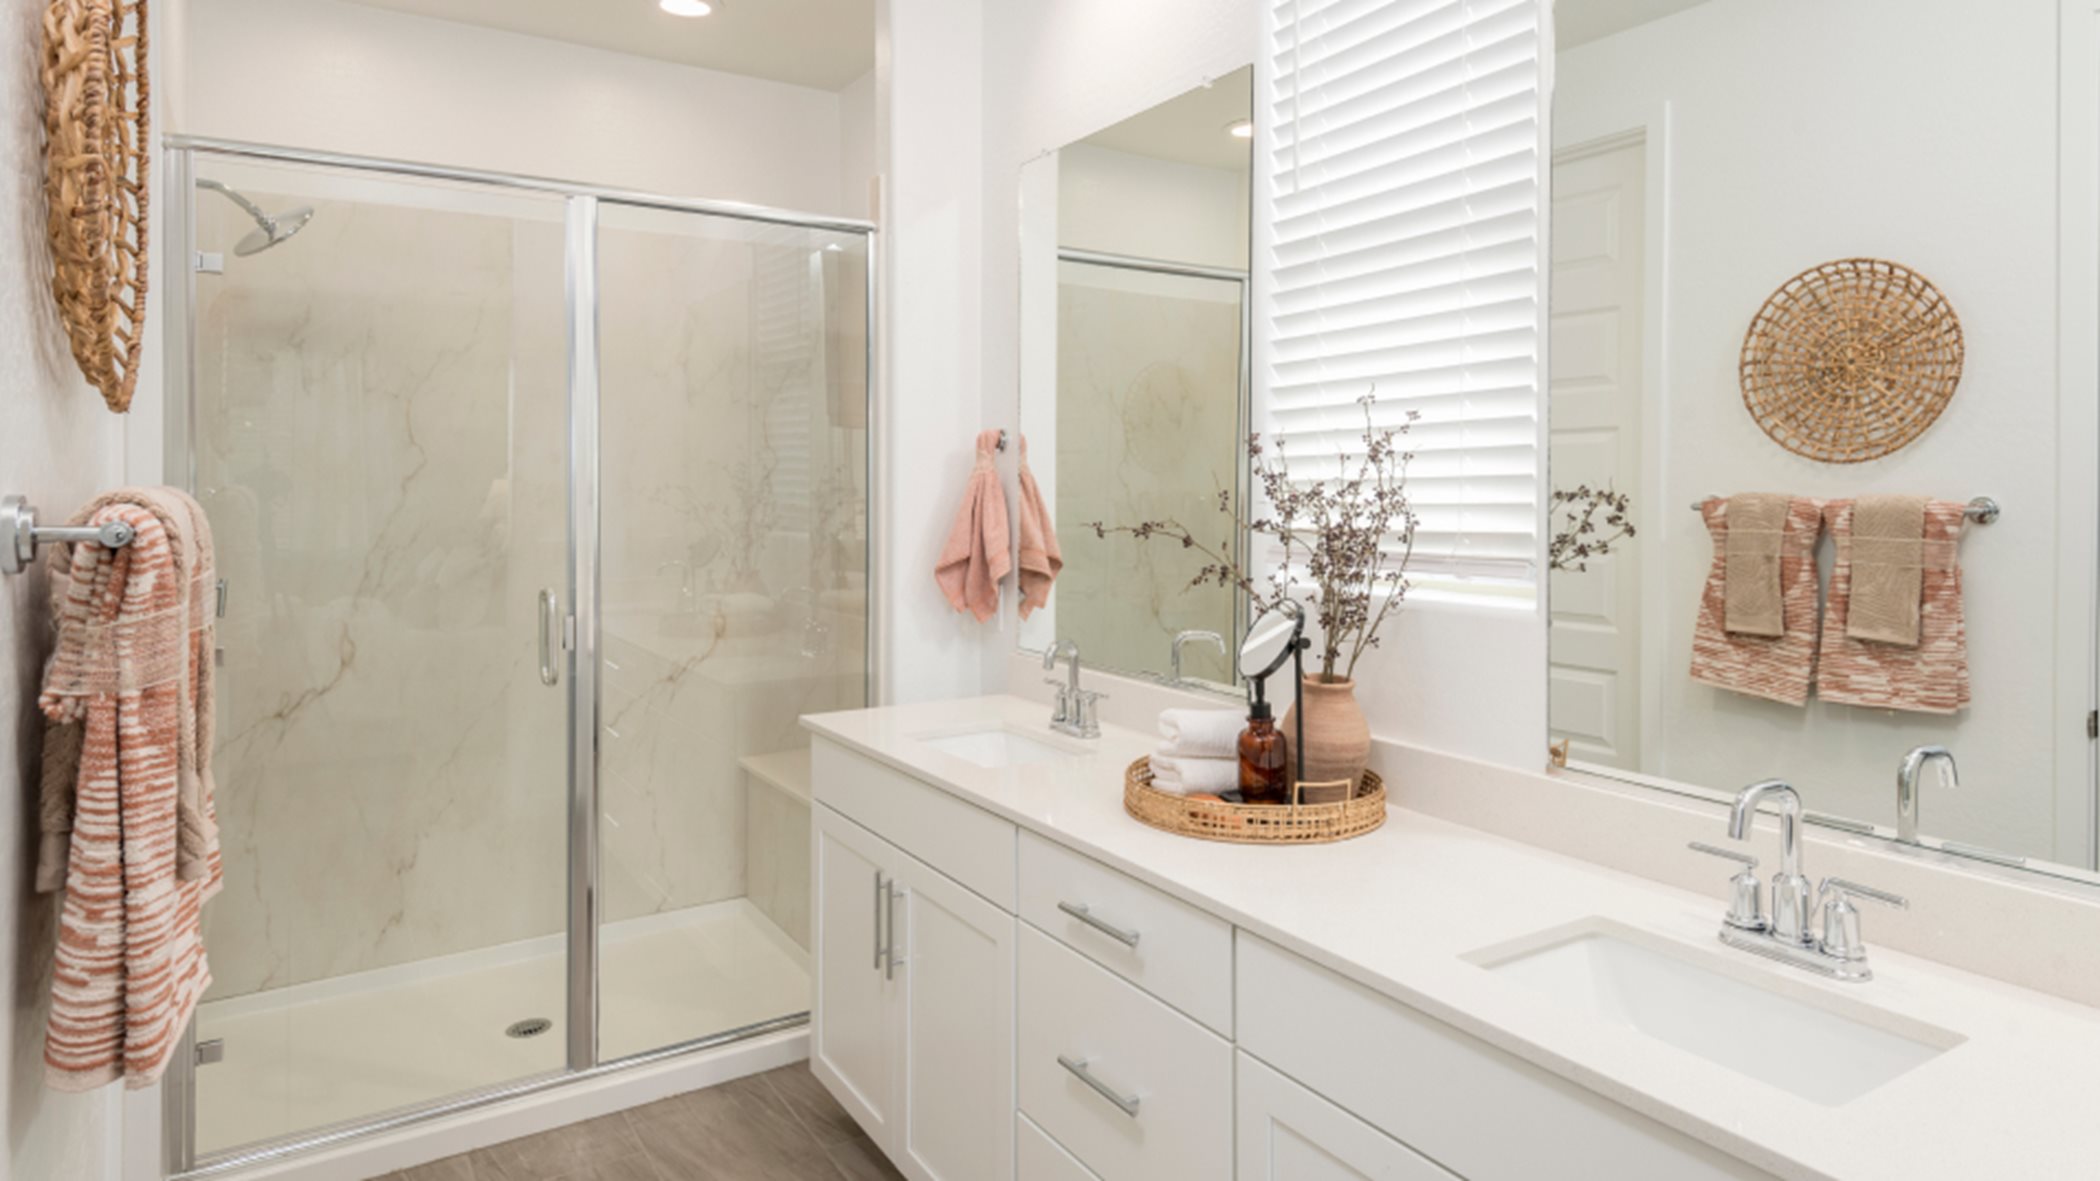 Owner's suite bathroom with dual sinks and glass-enclosed shower